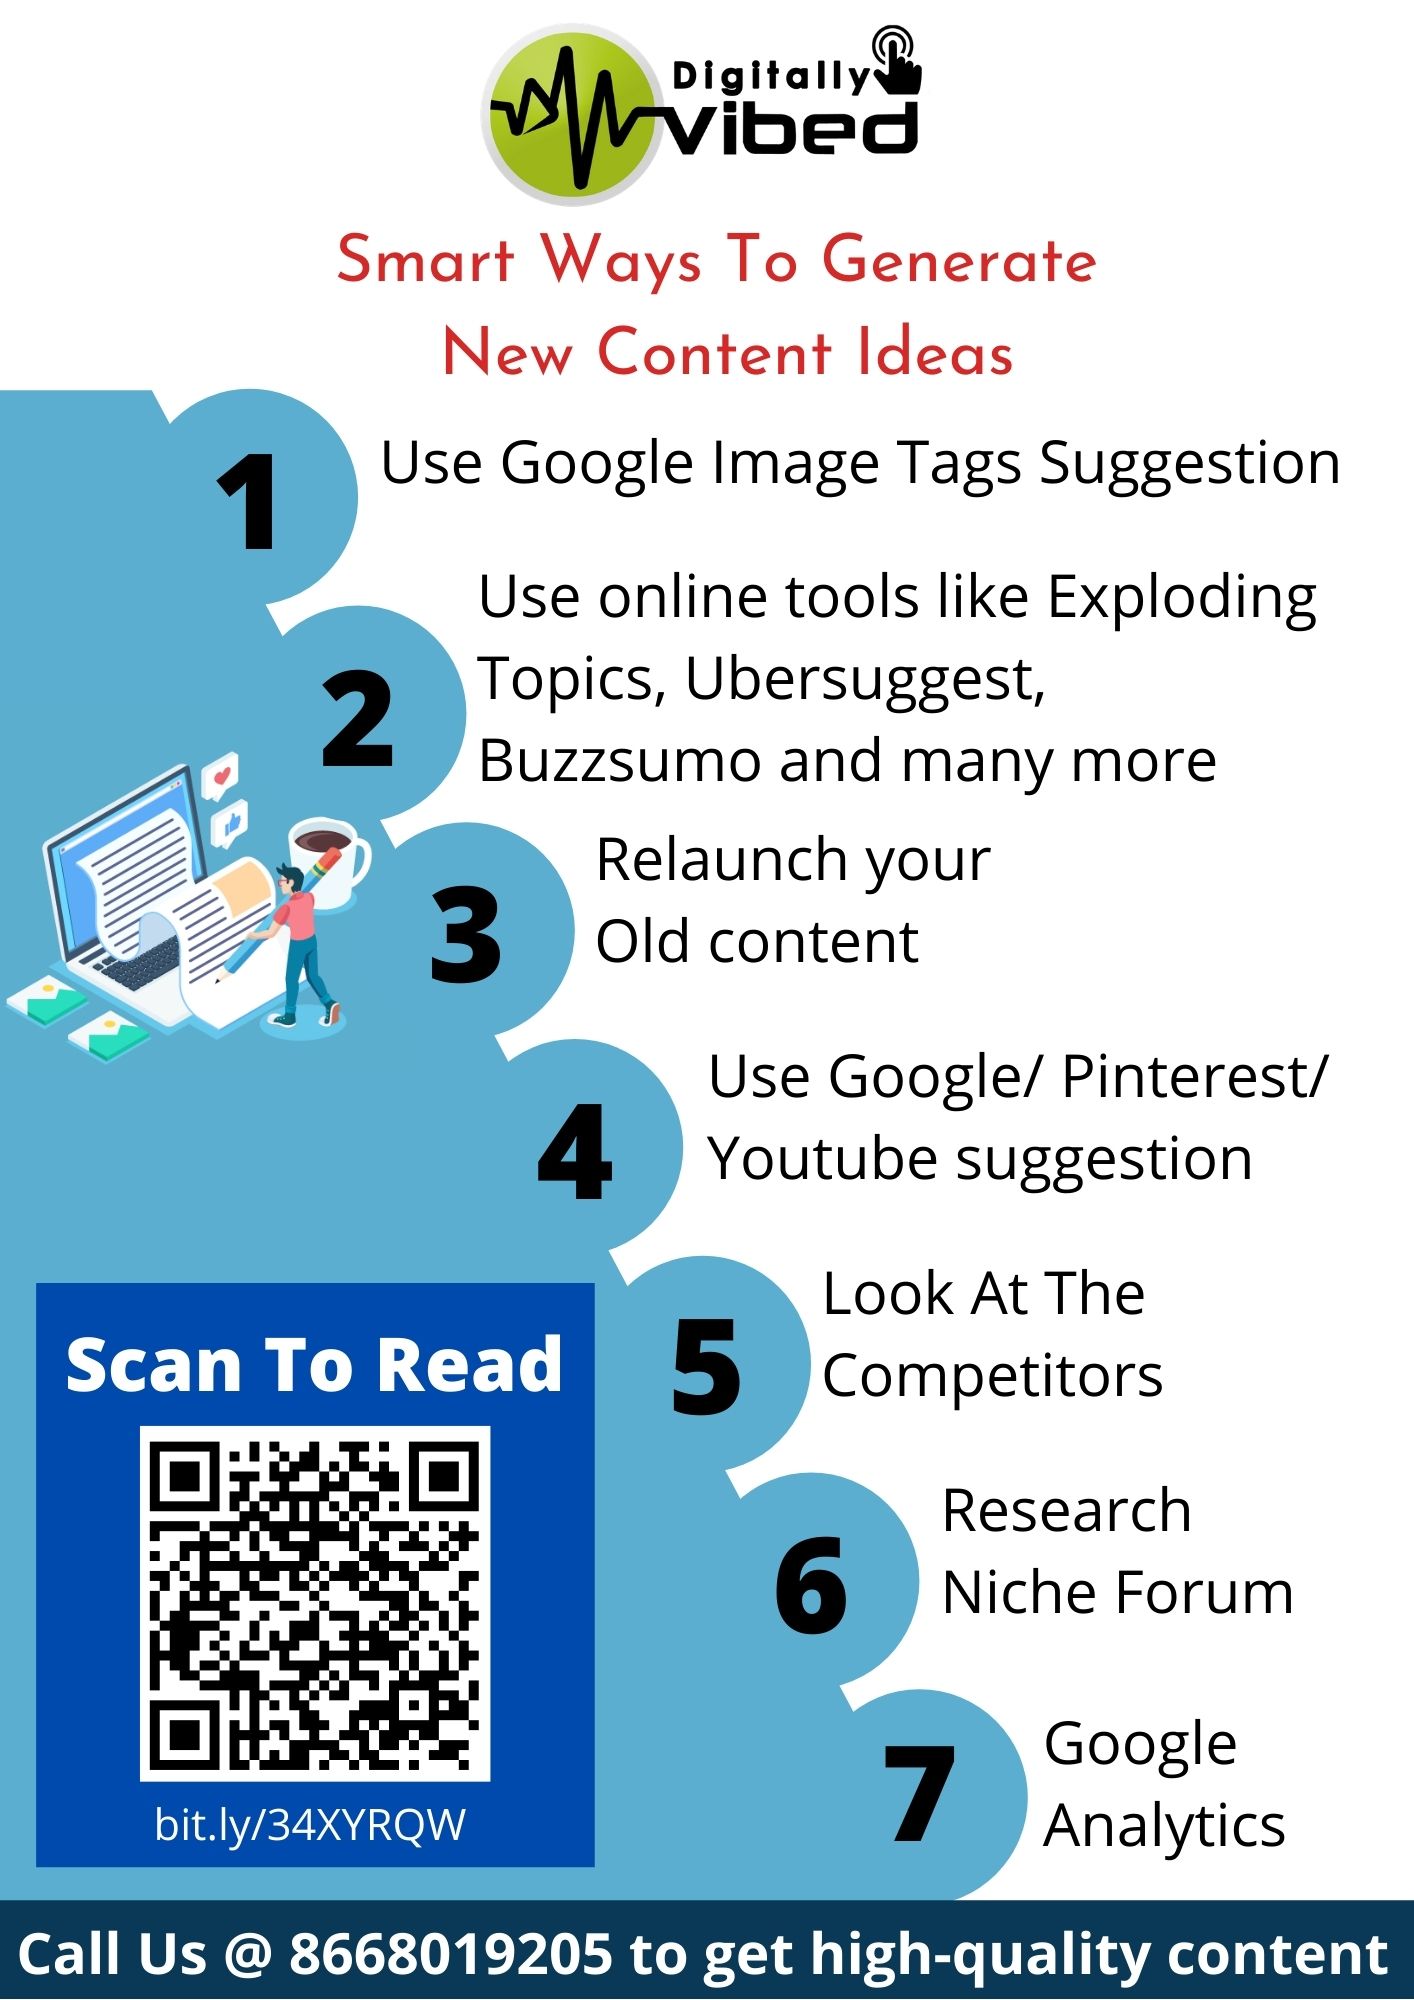 Smart Ways To Generate New Content Ideas